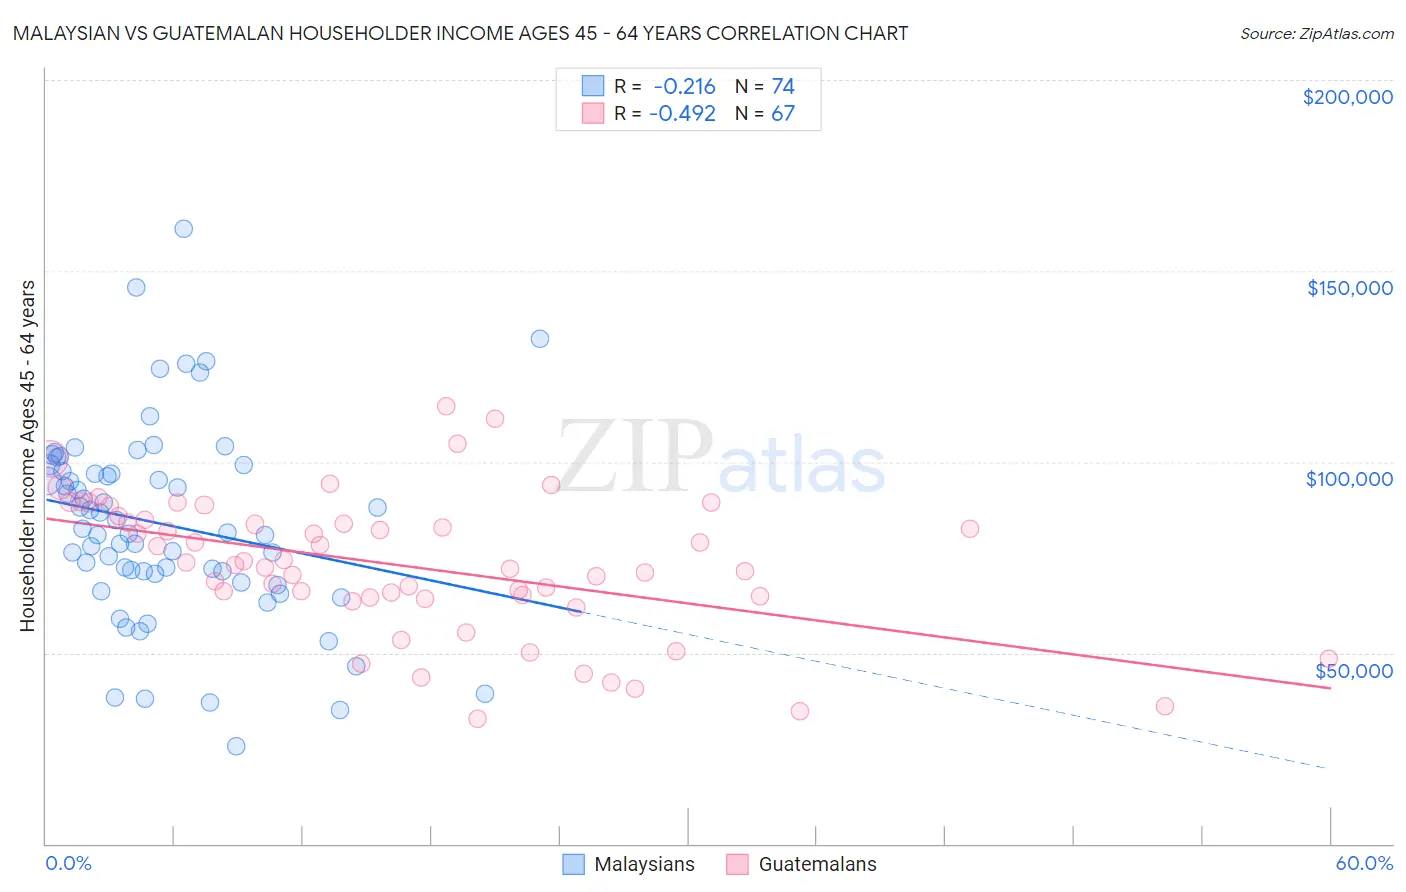 Malaysian vs Guatemalan Householder Income Ages 45 - 64 years